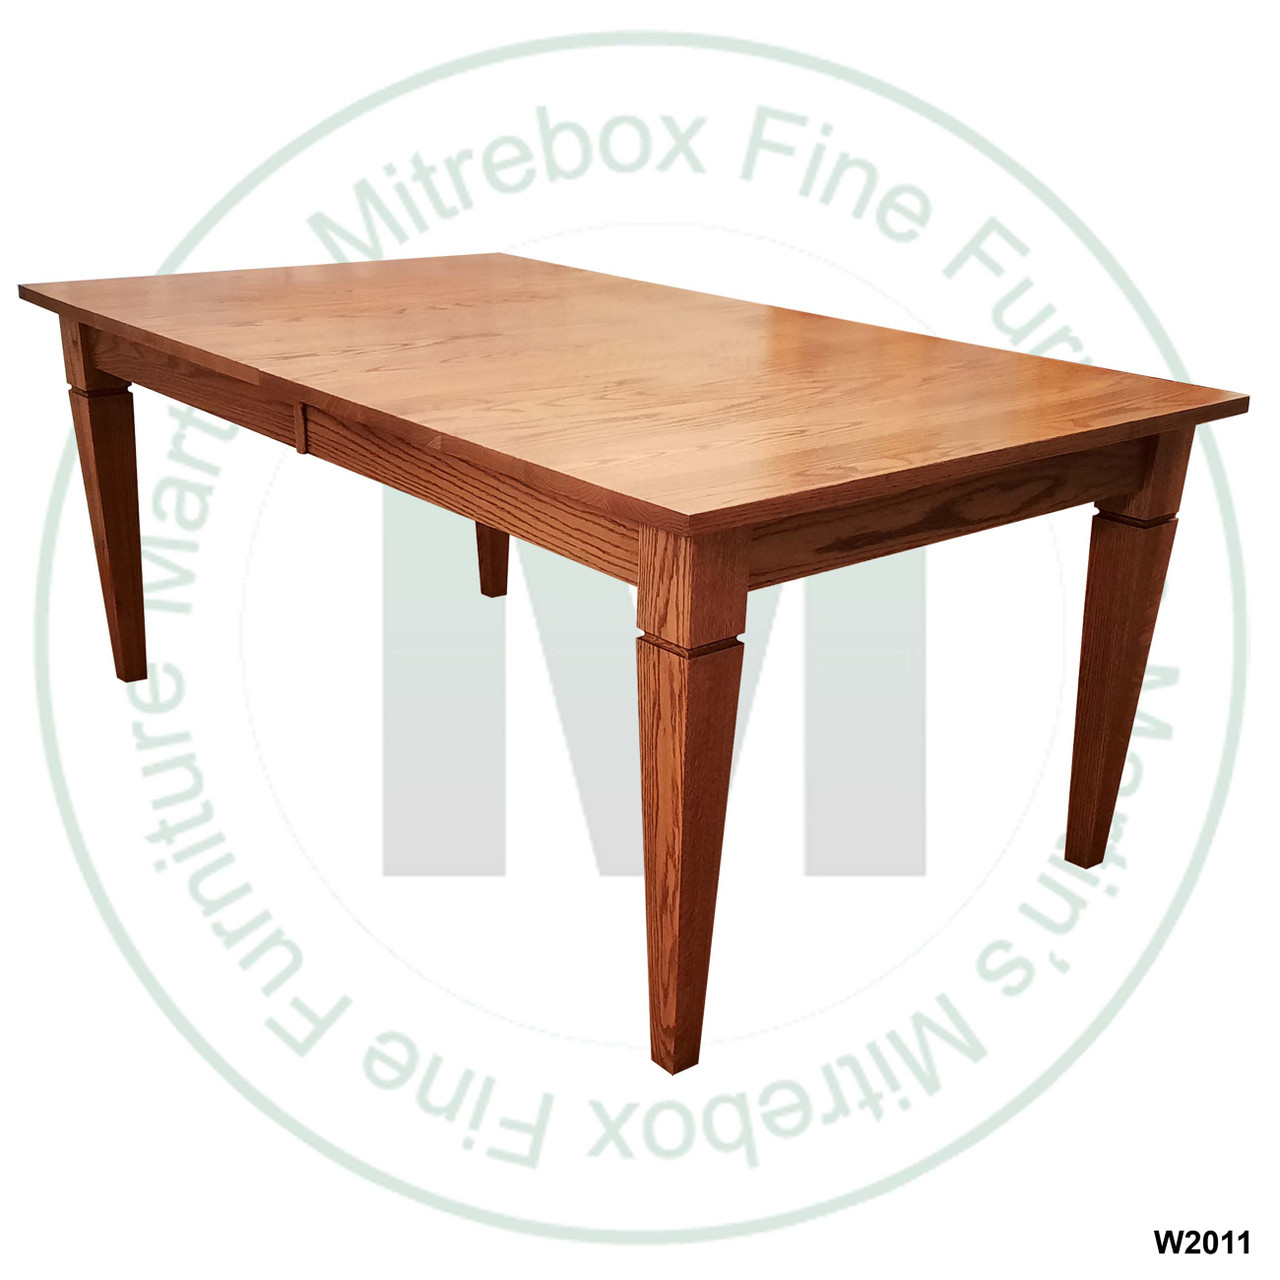 Oak Reesor Solid Top Harvest Table 36''D x 84''W x 30''H Table Has 1'' Thick Top And 2 - 16'' Extensions